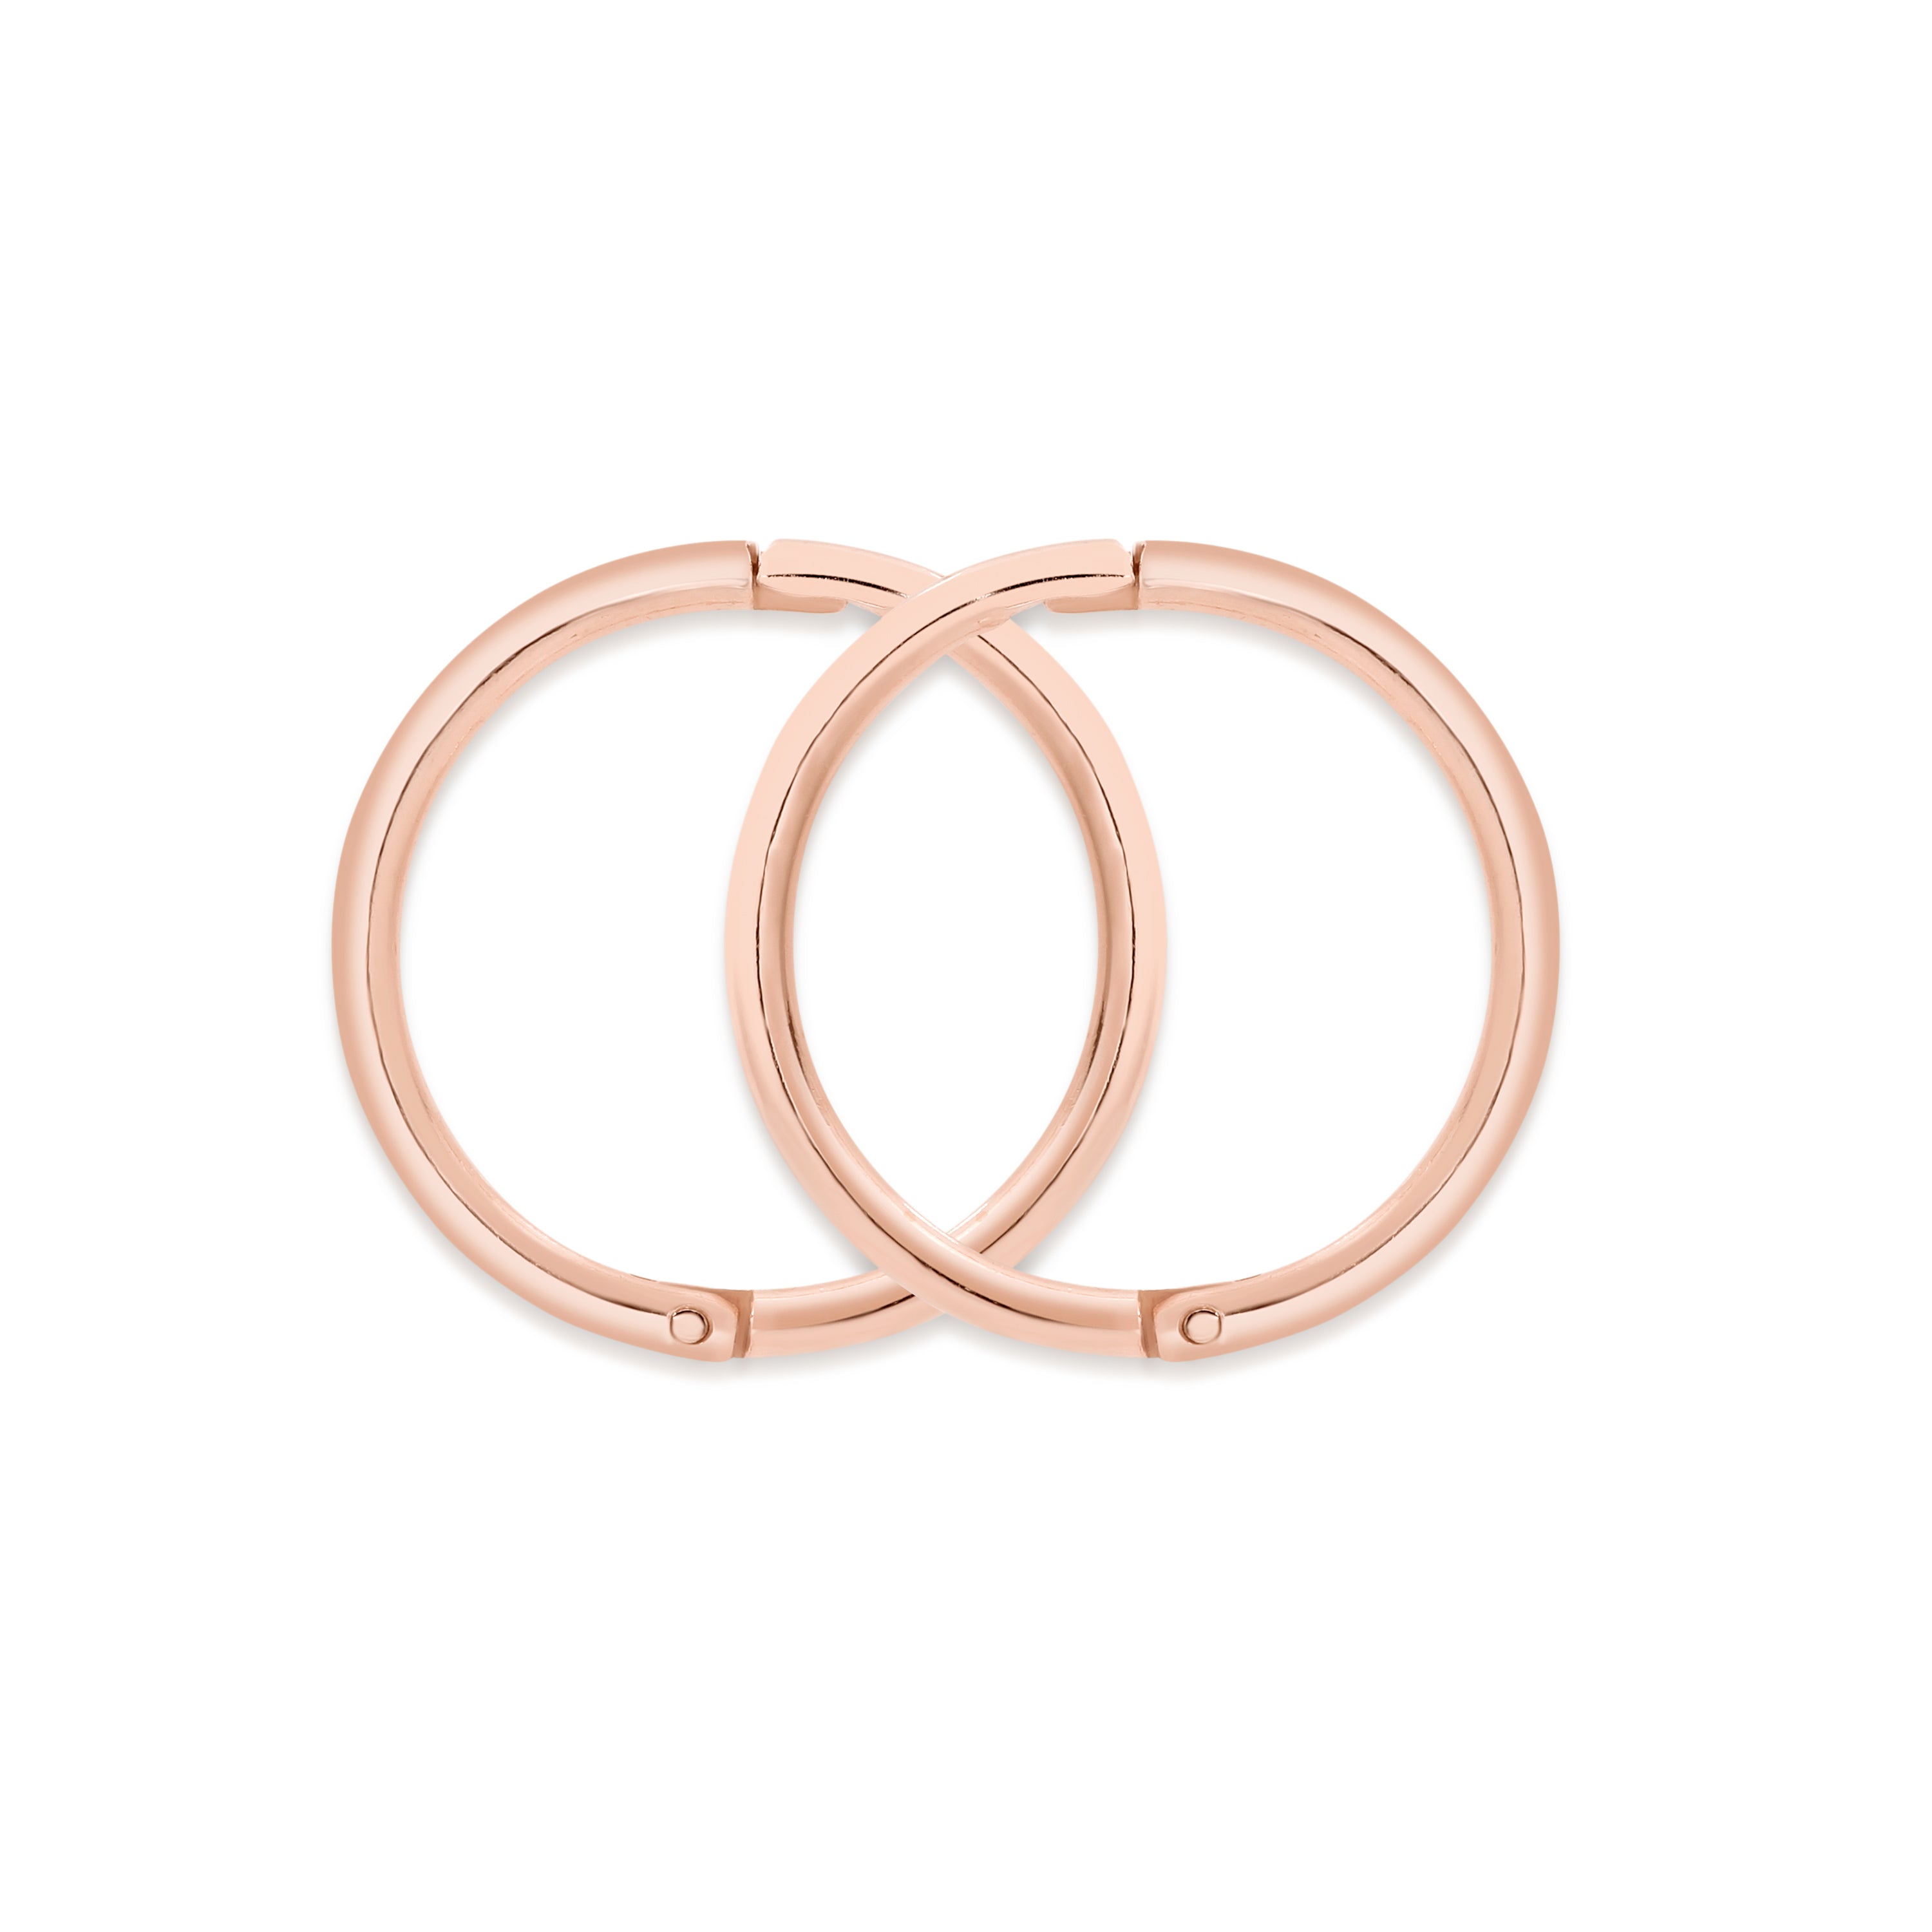 9ct rose gold small plain gold sleepers